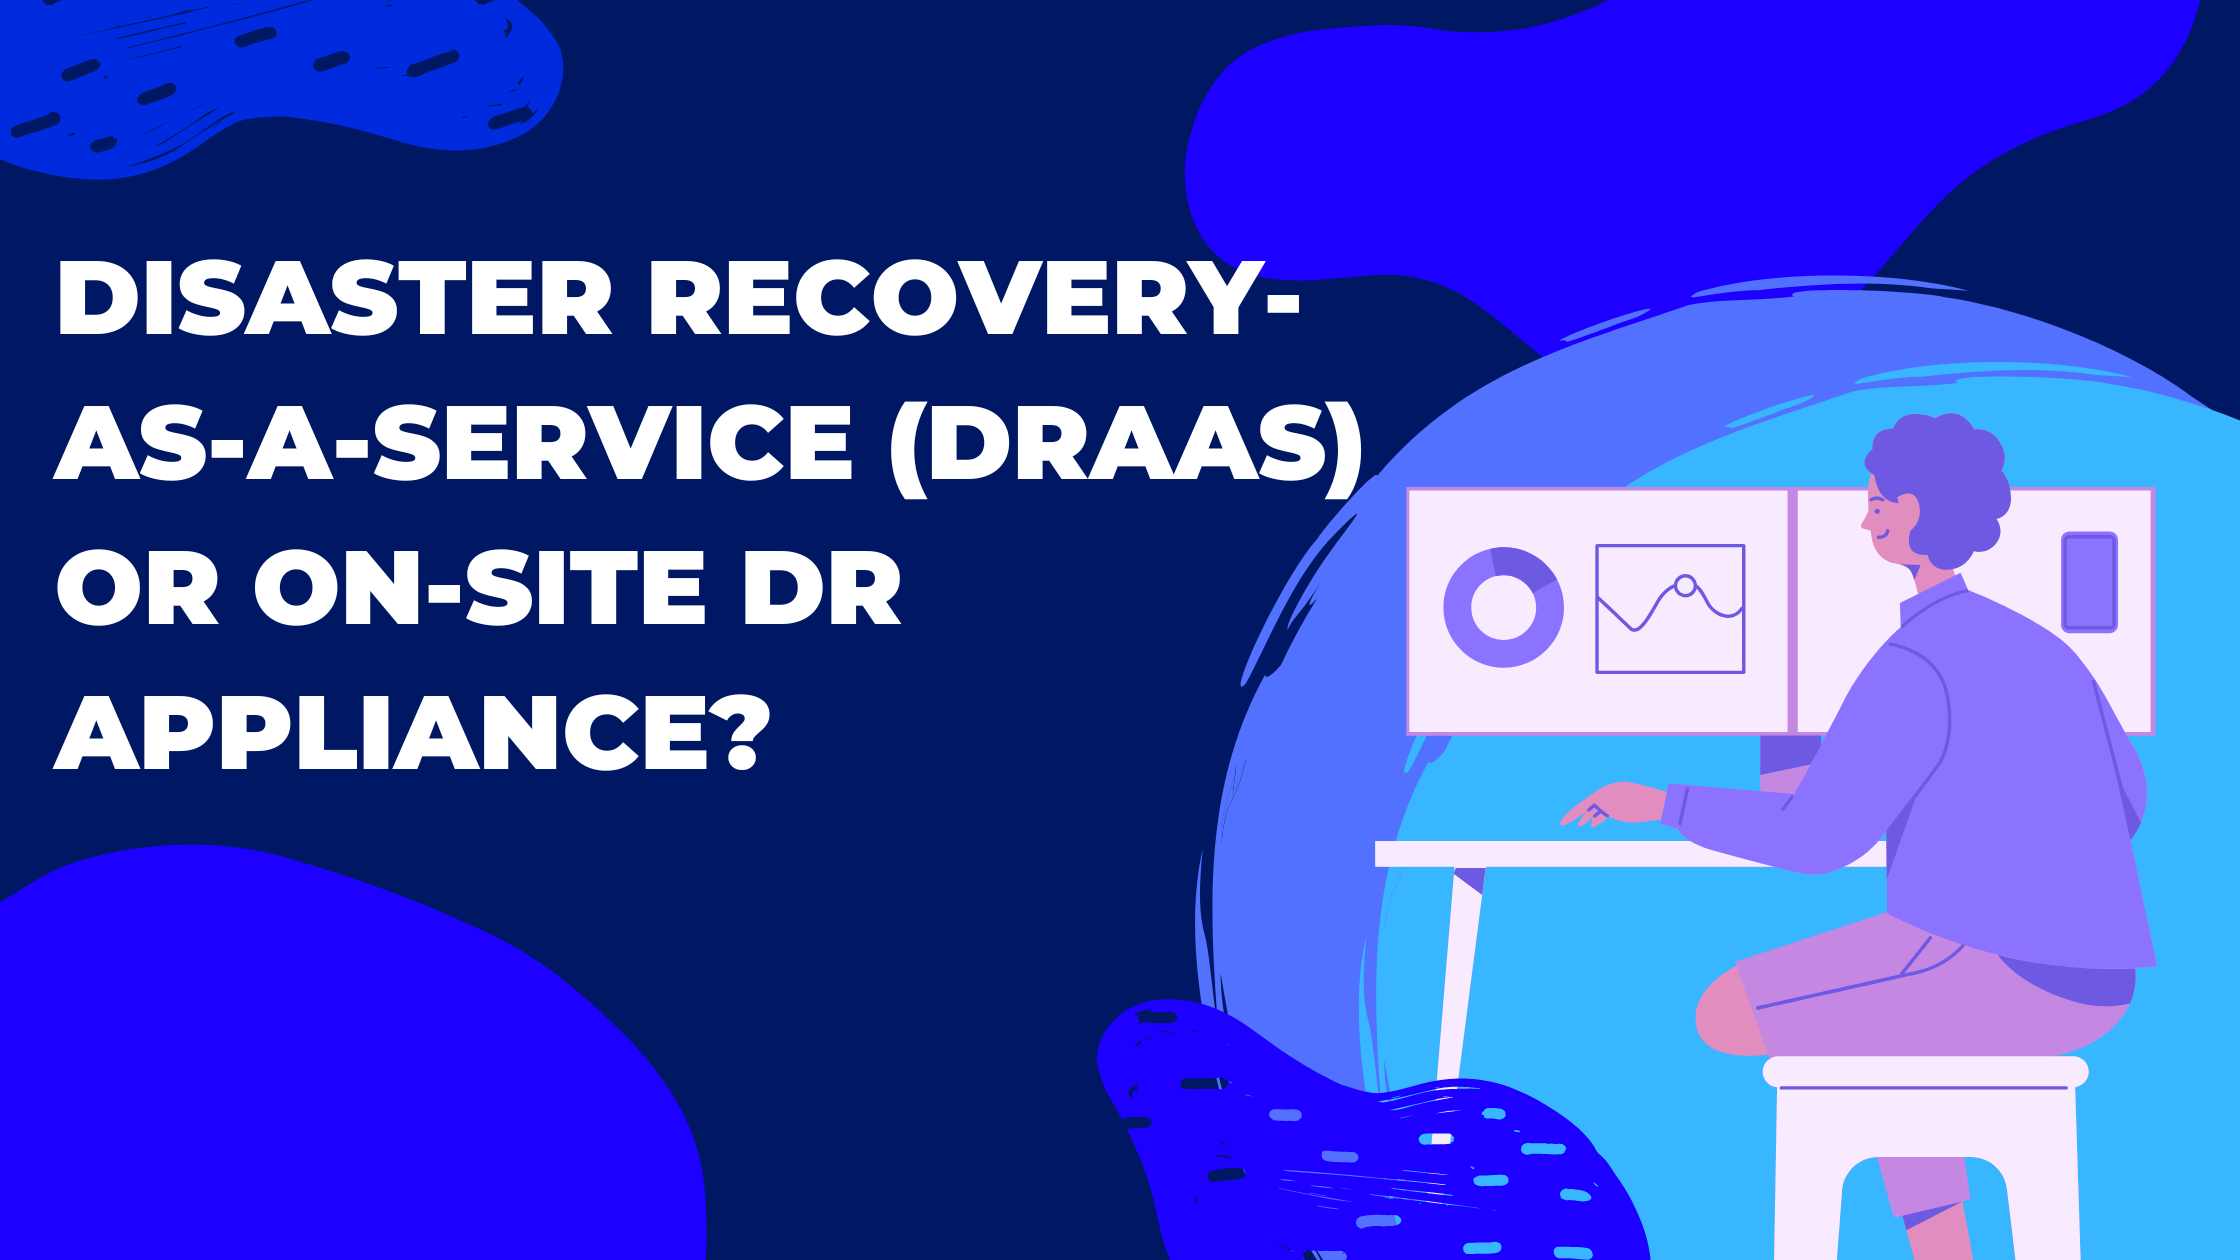 Disaster Recovery as a Service (DRaaS) or On-Site DR Appliance?